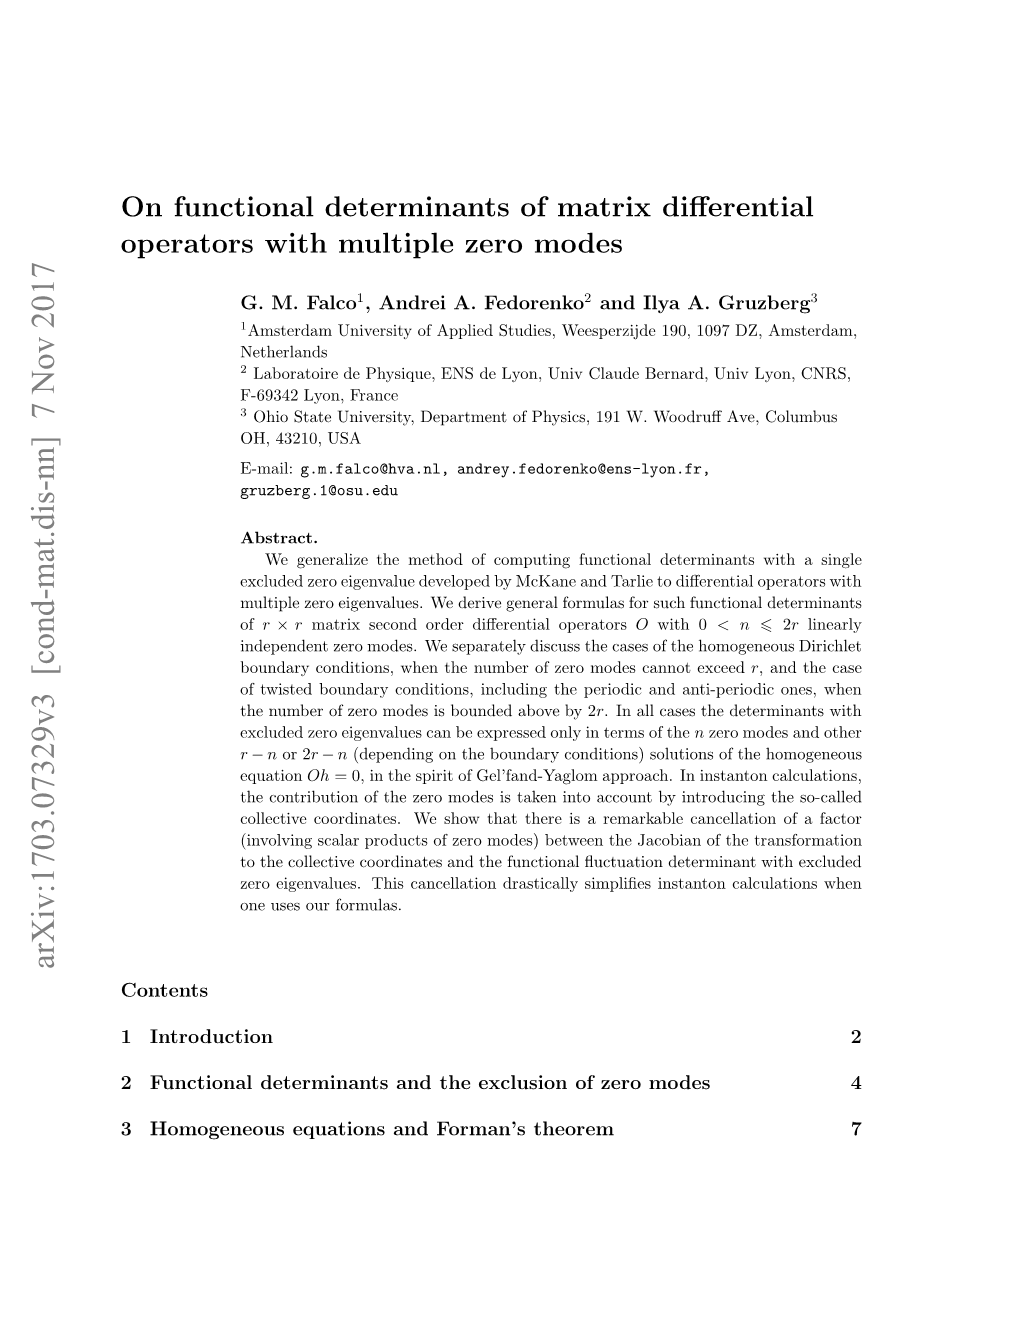 On Functional Determinants of Matrix Differential Operators with Multiple